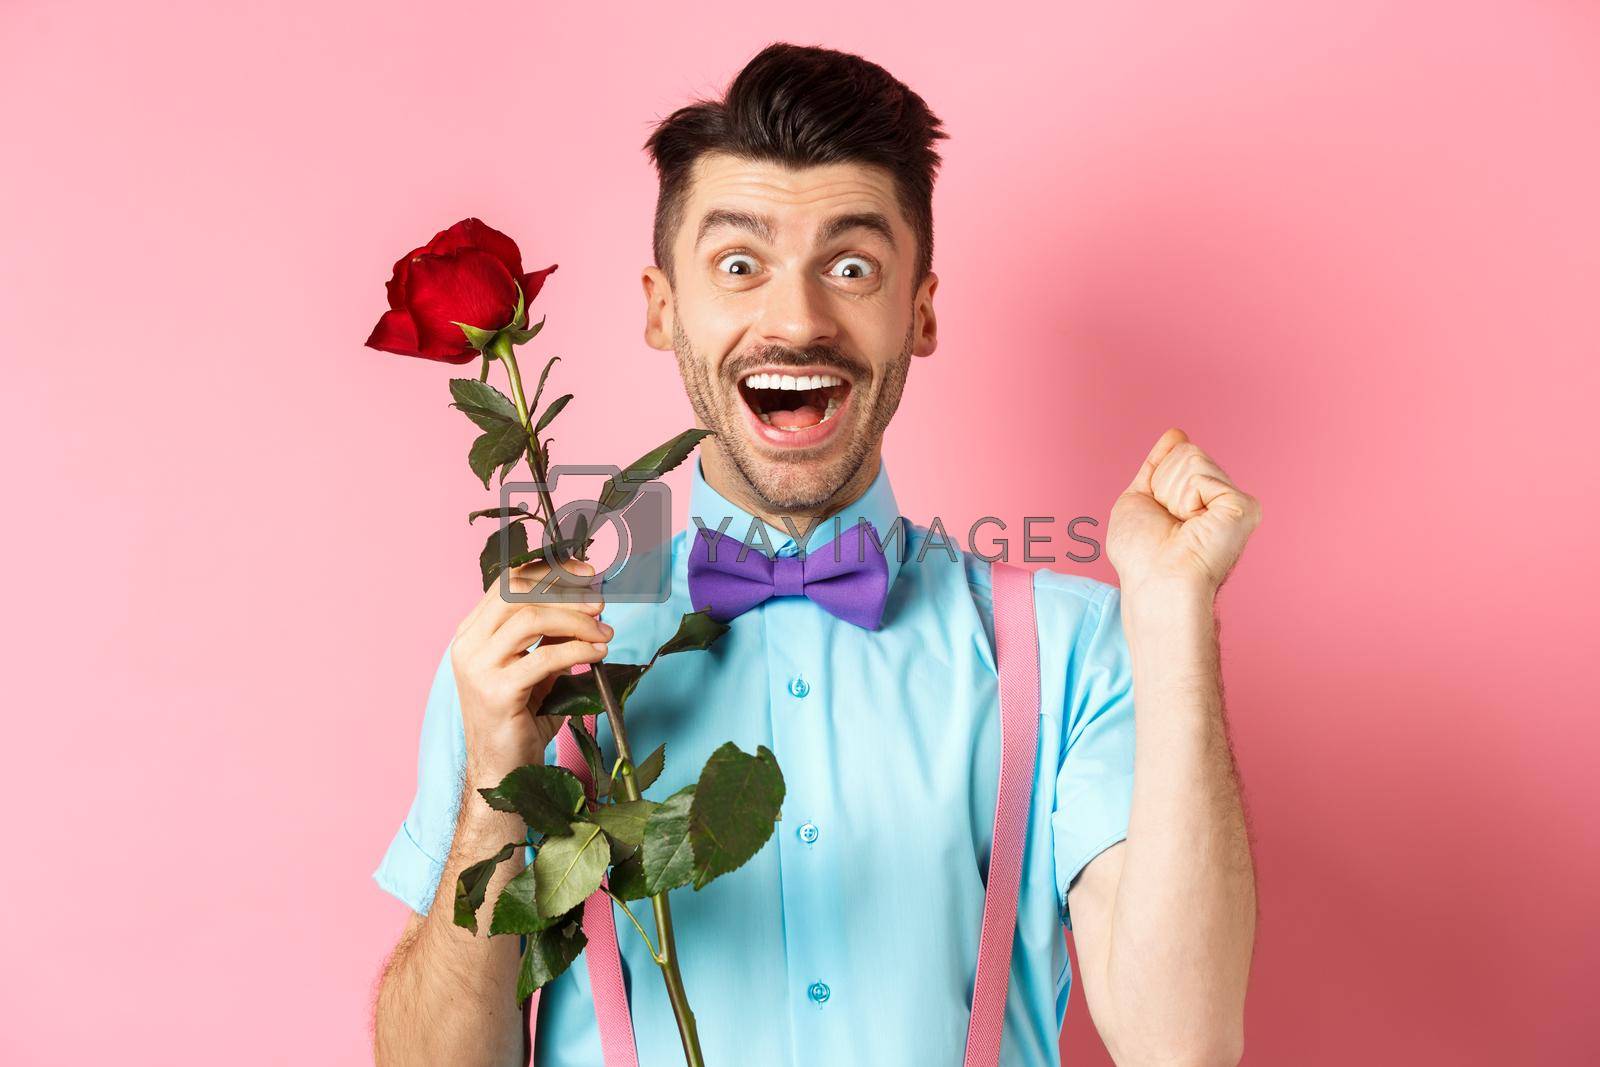 Valentines day and romance concept. Excited boyfriend jumping from happiness on romantic date, holding red rose and celebrating, standing on pink background.